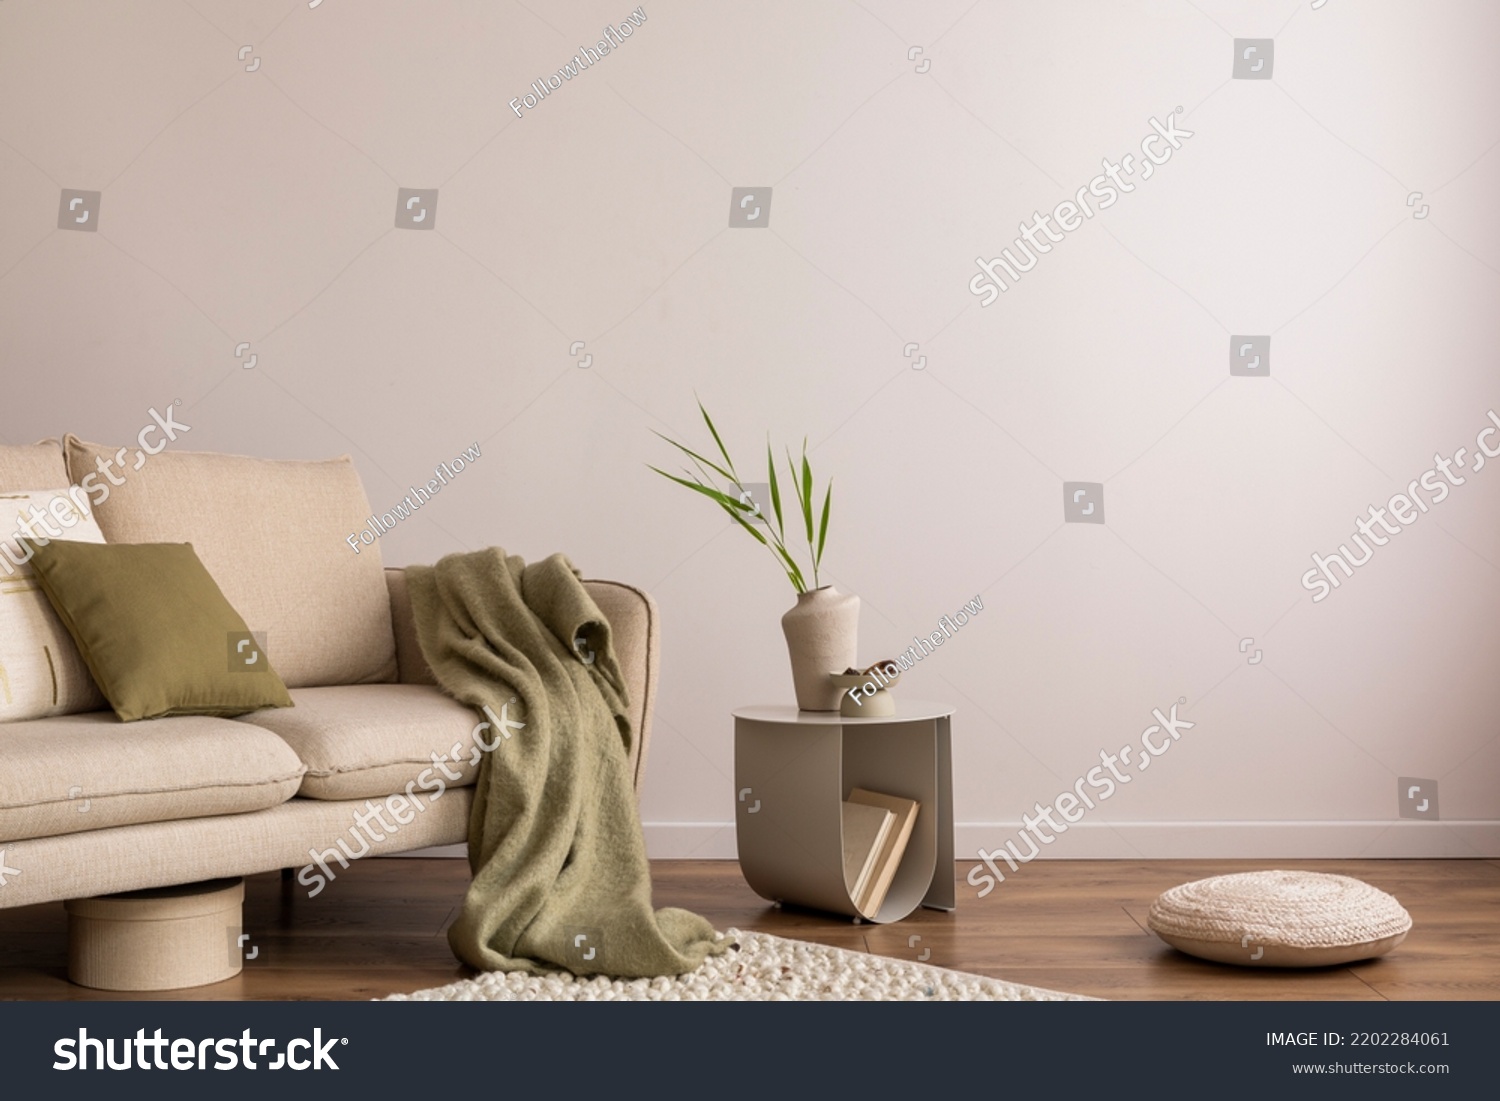 Interior design of living room with copy space, beige sofa, side table, leaf in vase, pouf, elegant accessories and boucle rug. Beige wall. Minimalist home decor. Template.  #2202284061